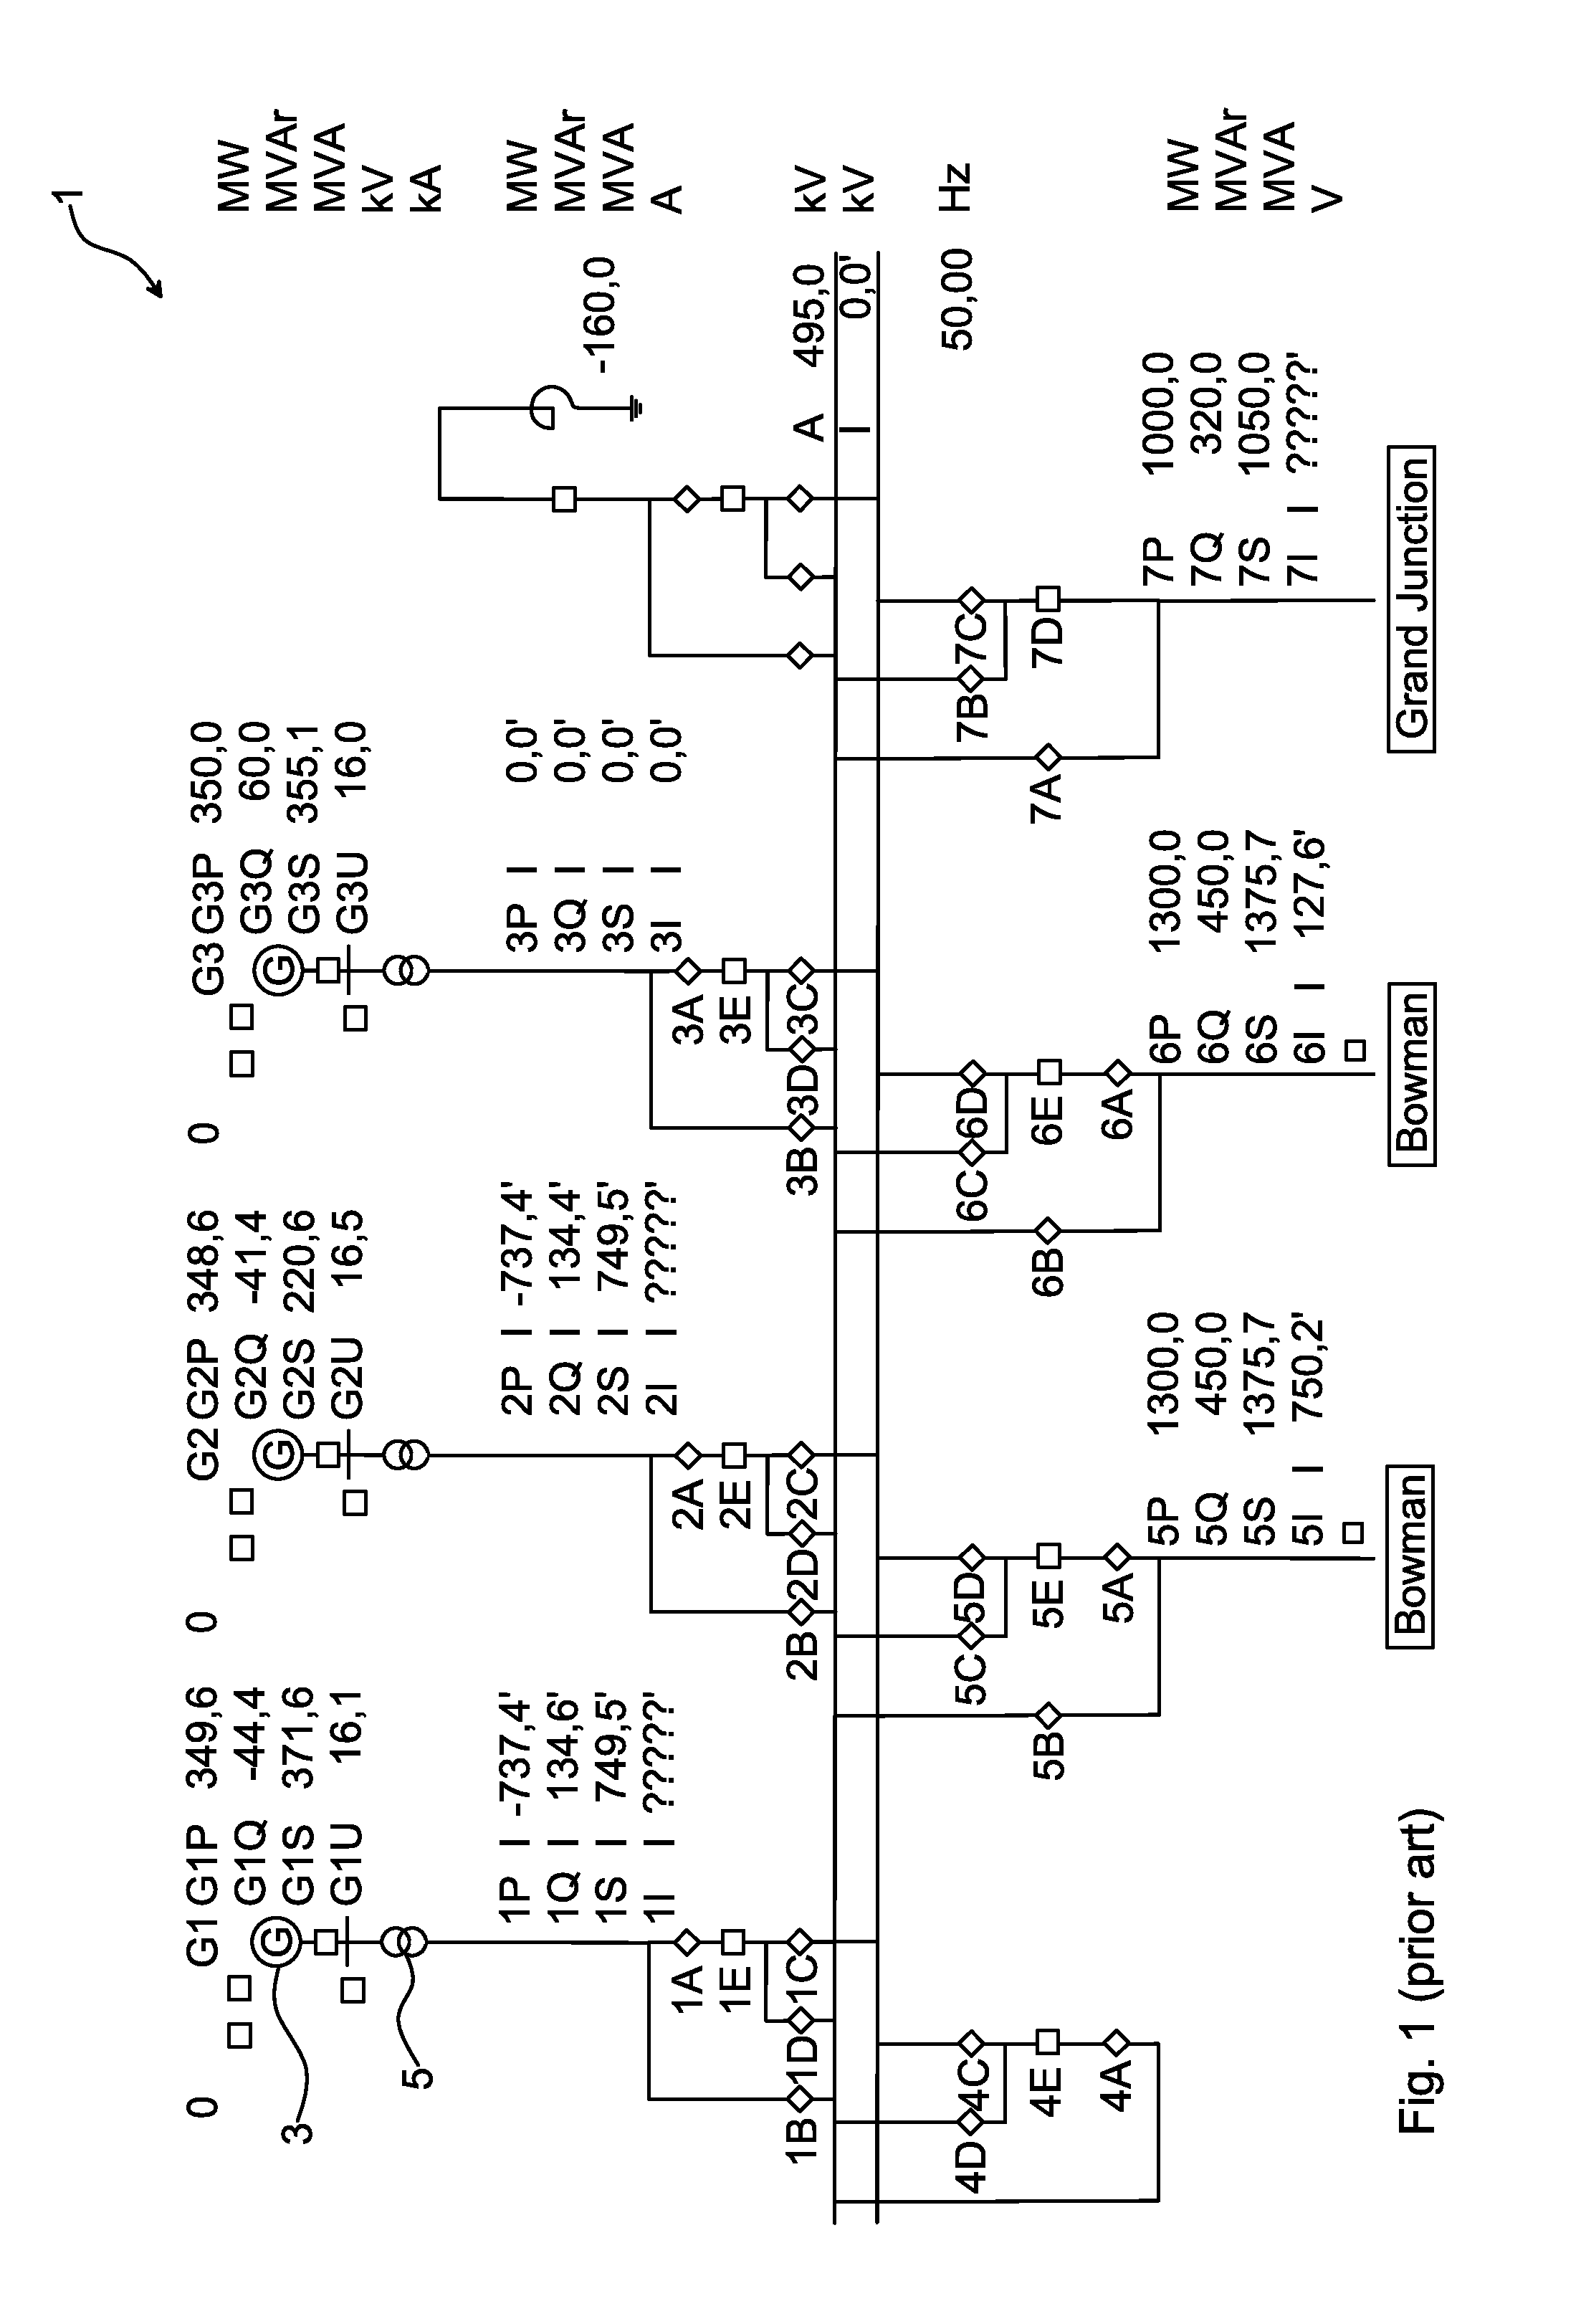 Method And System For Facilitating Control Of An Industrial System